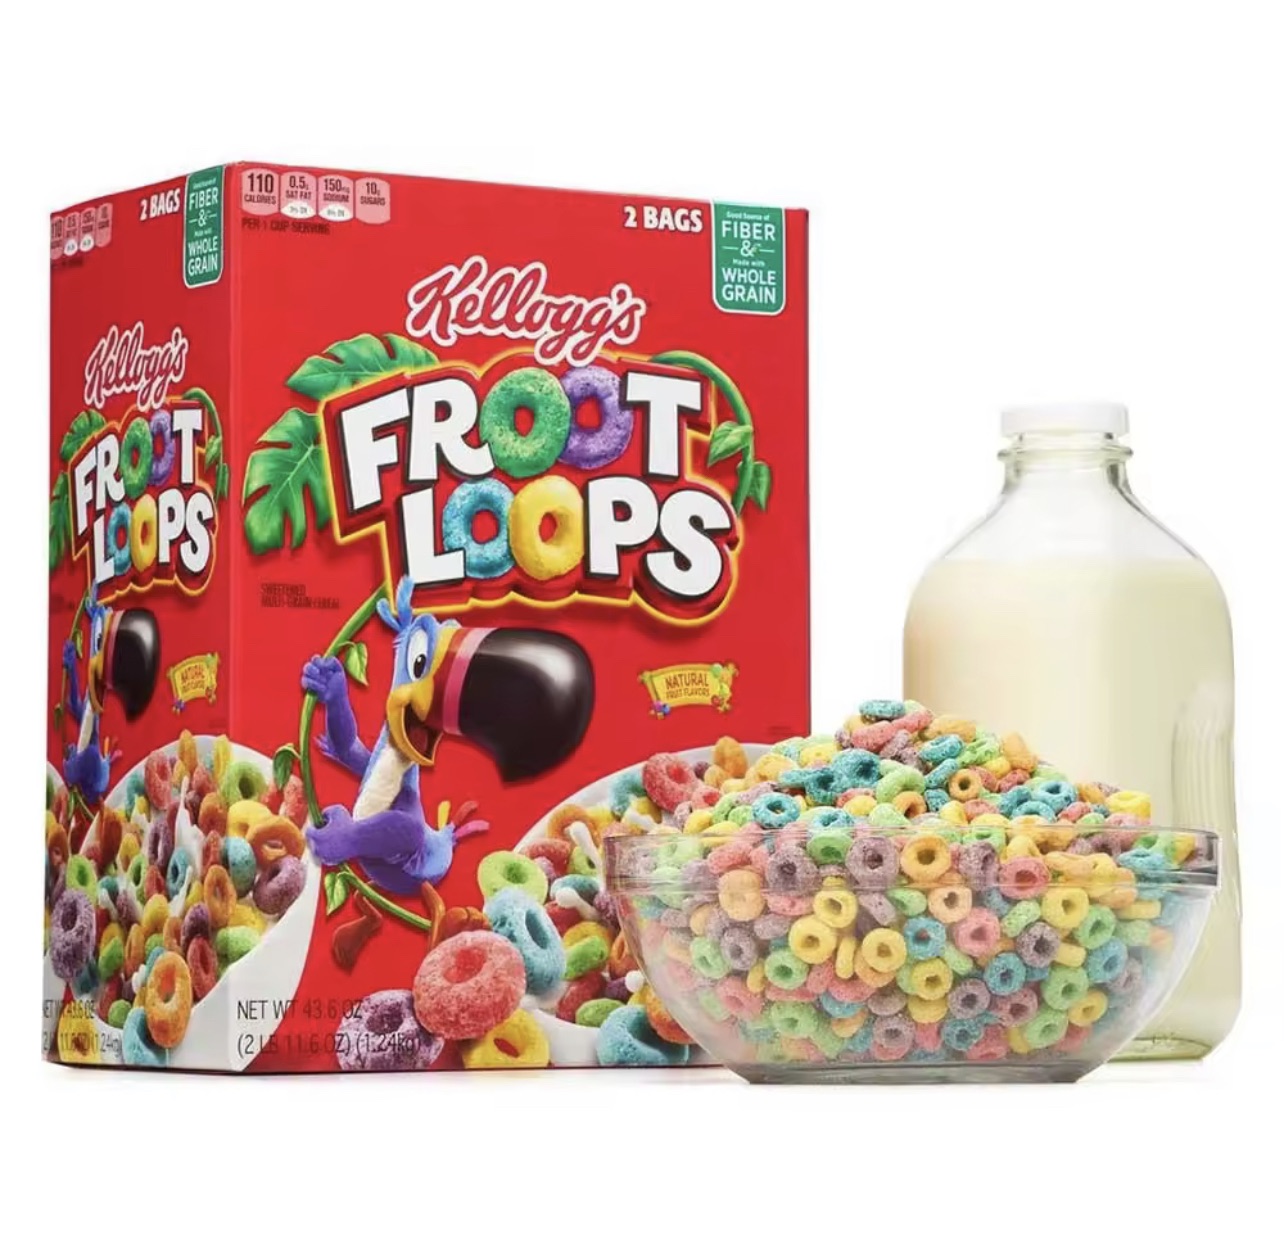 Kellogg's Froot Loops Cereal 43.6 oz 2 Bags Toucan whole grain fruit